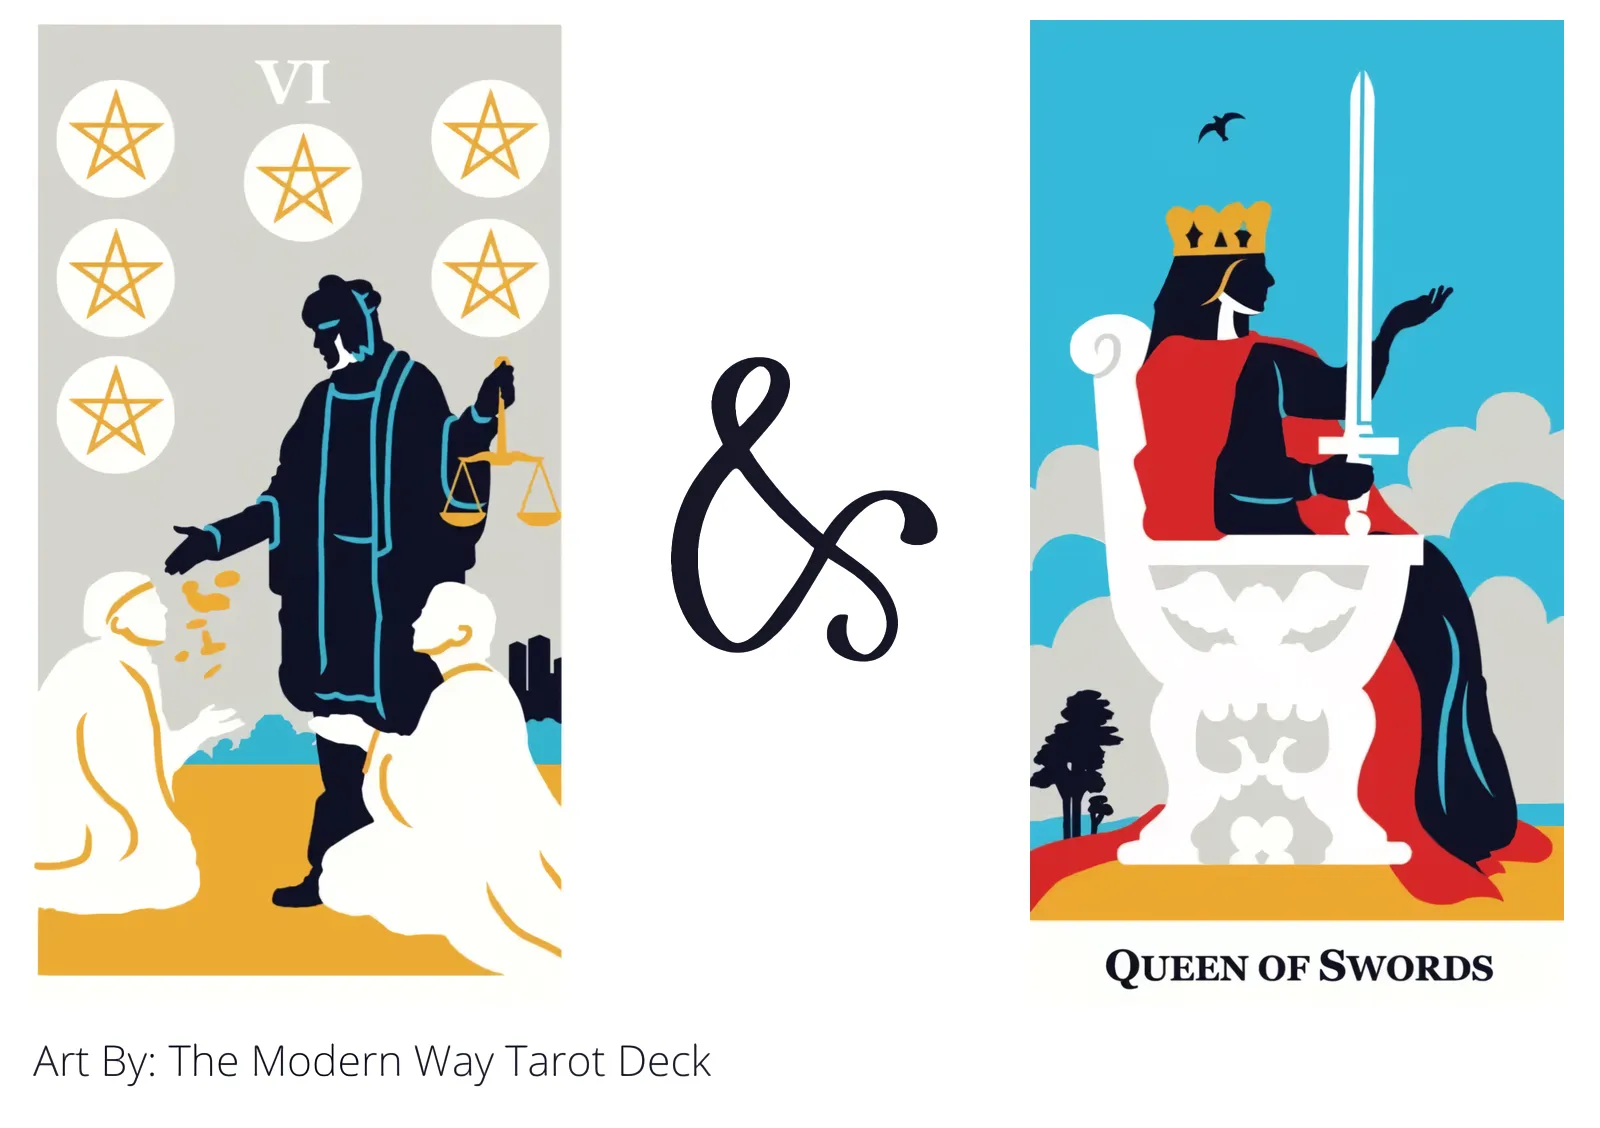 six of pentacles and queen of swords tarot cards together